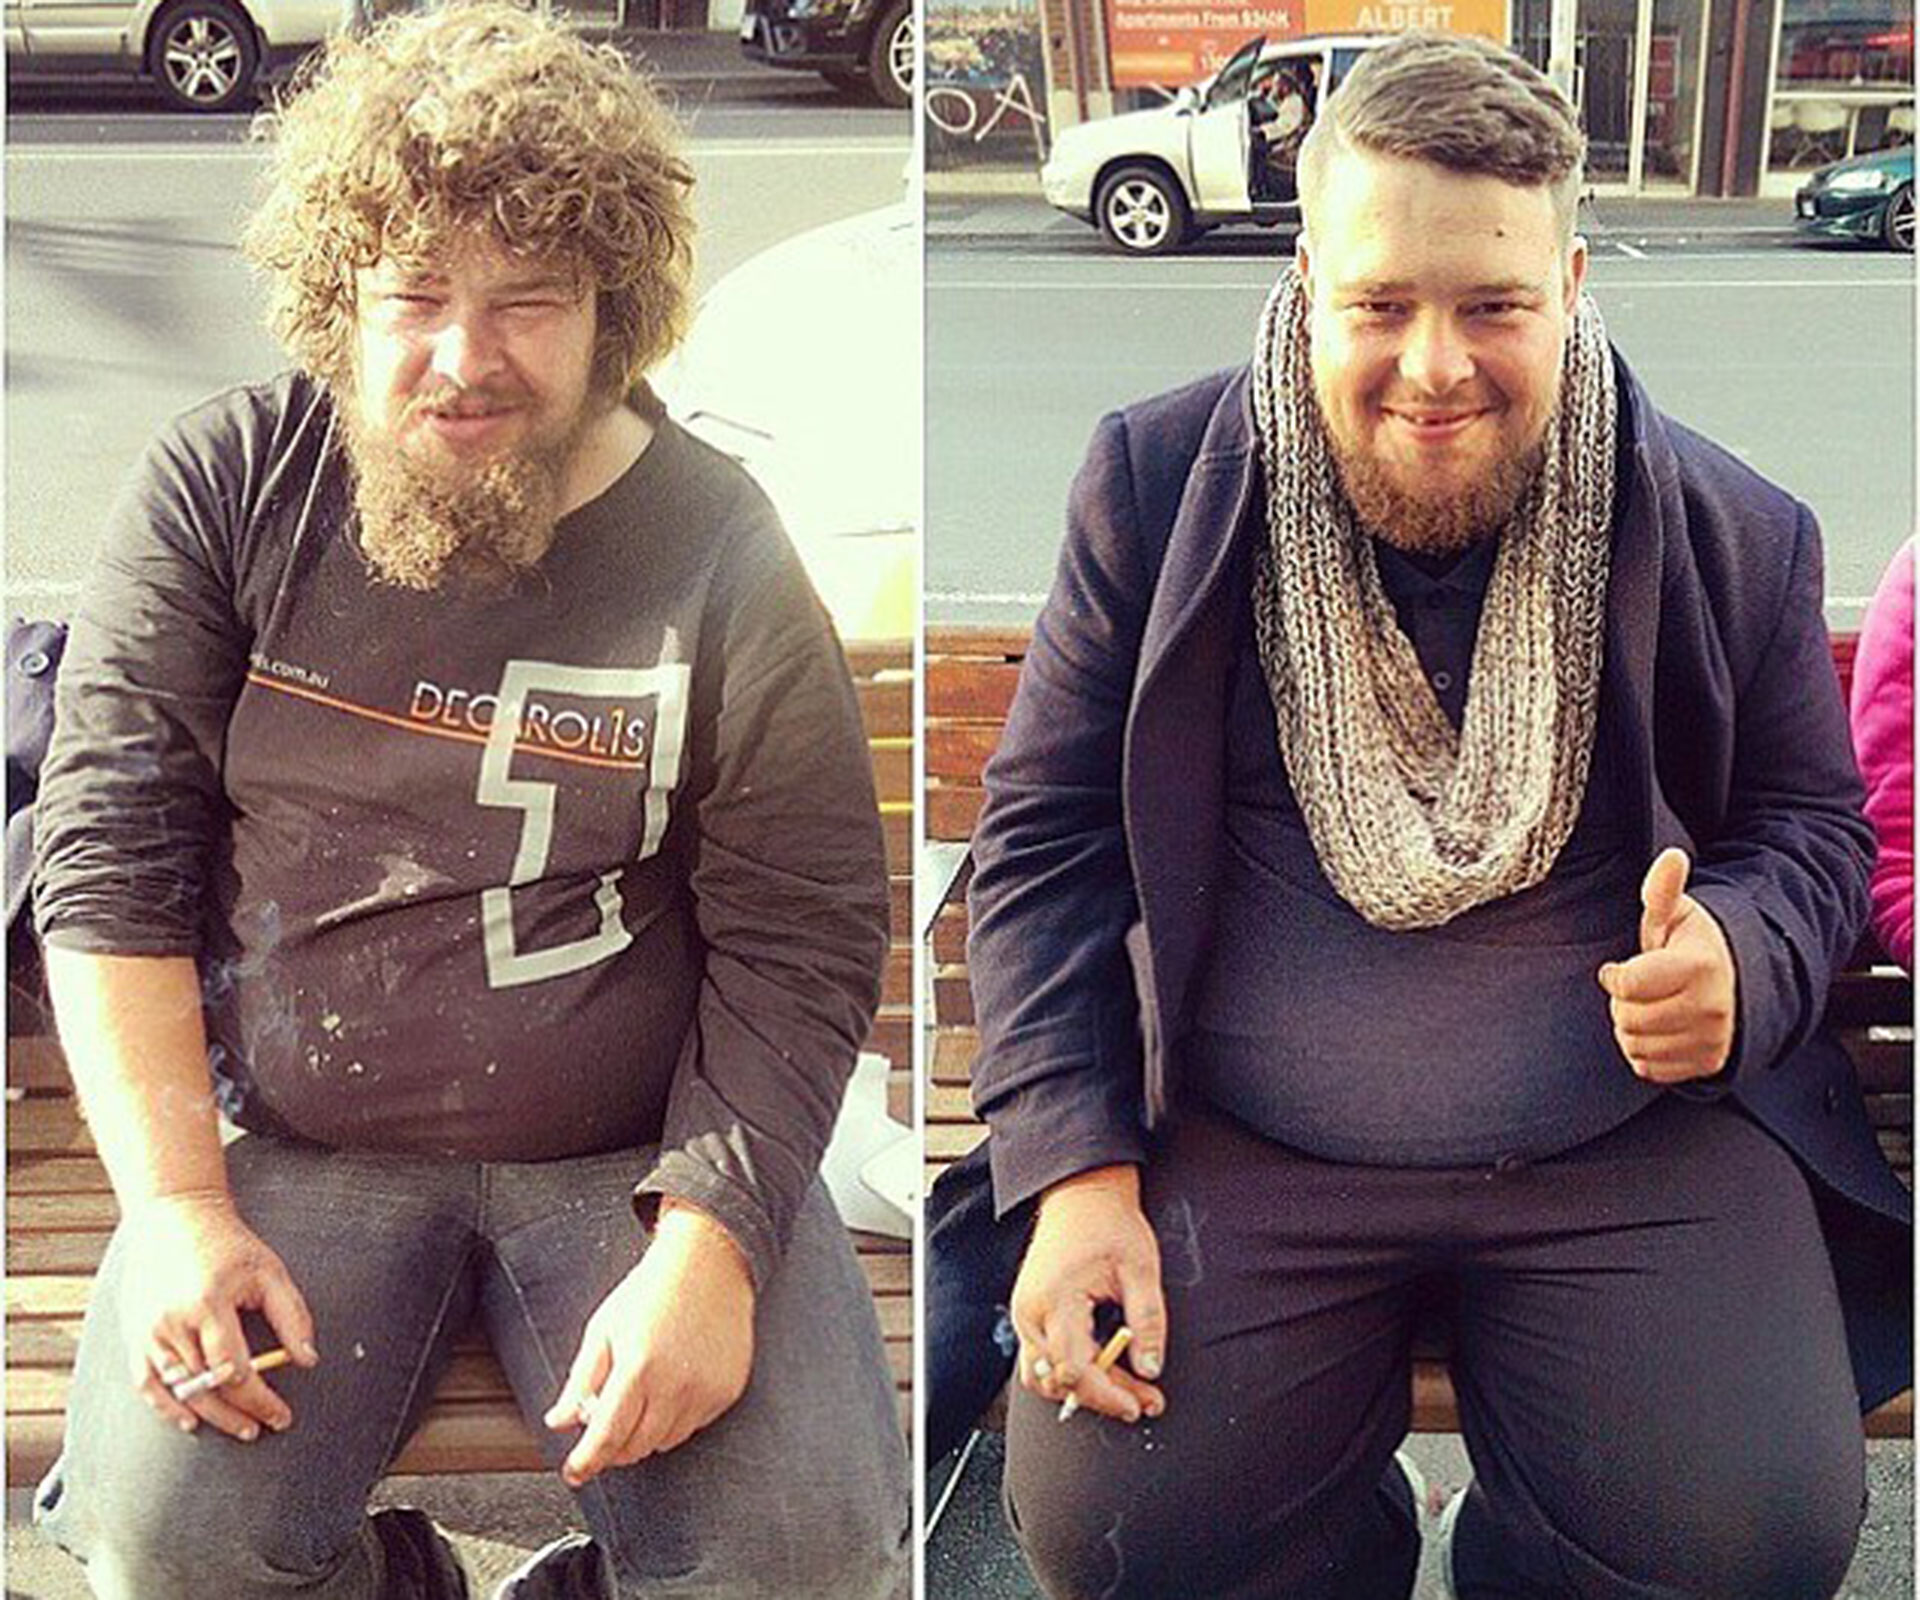 Melbourne barber giving haircuts to homeless